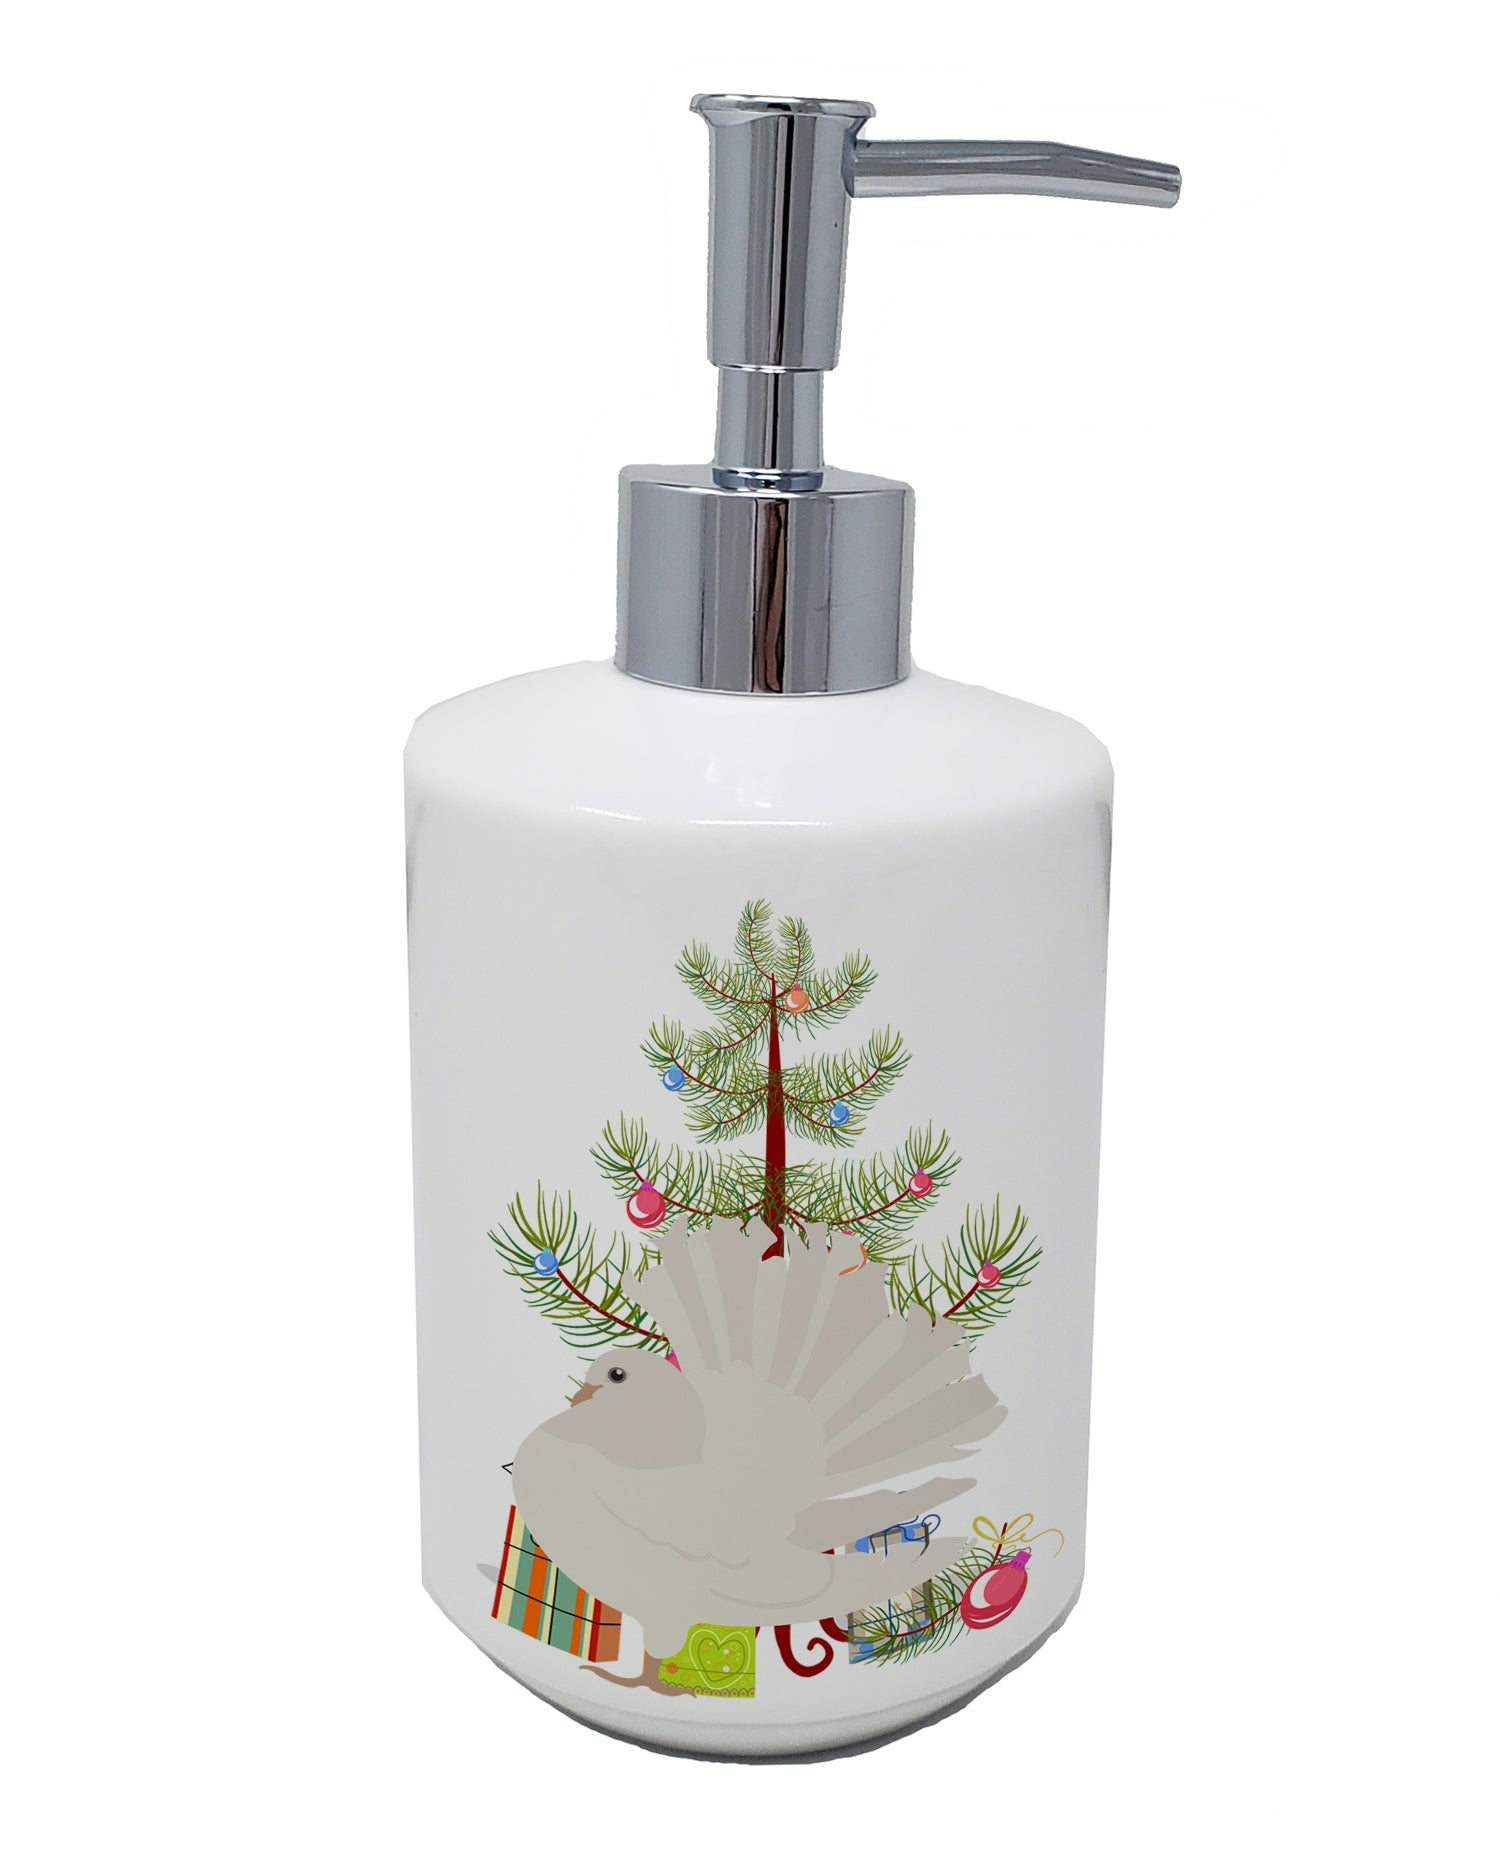 Buy this Silver Fantail Pigeon Christmas Ceramic Soap Dispenser